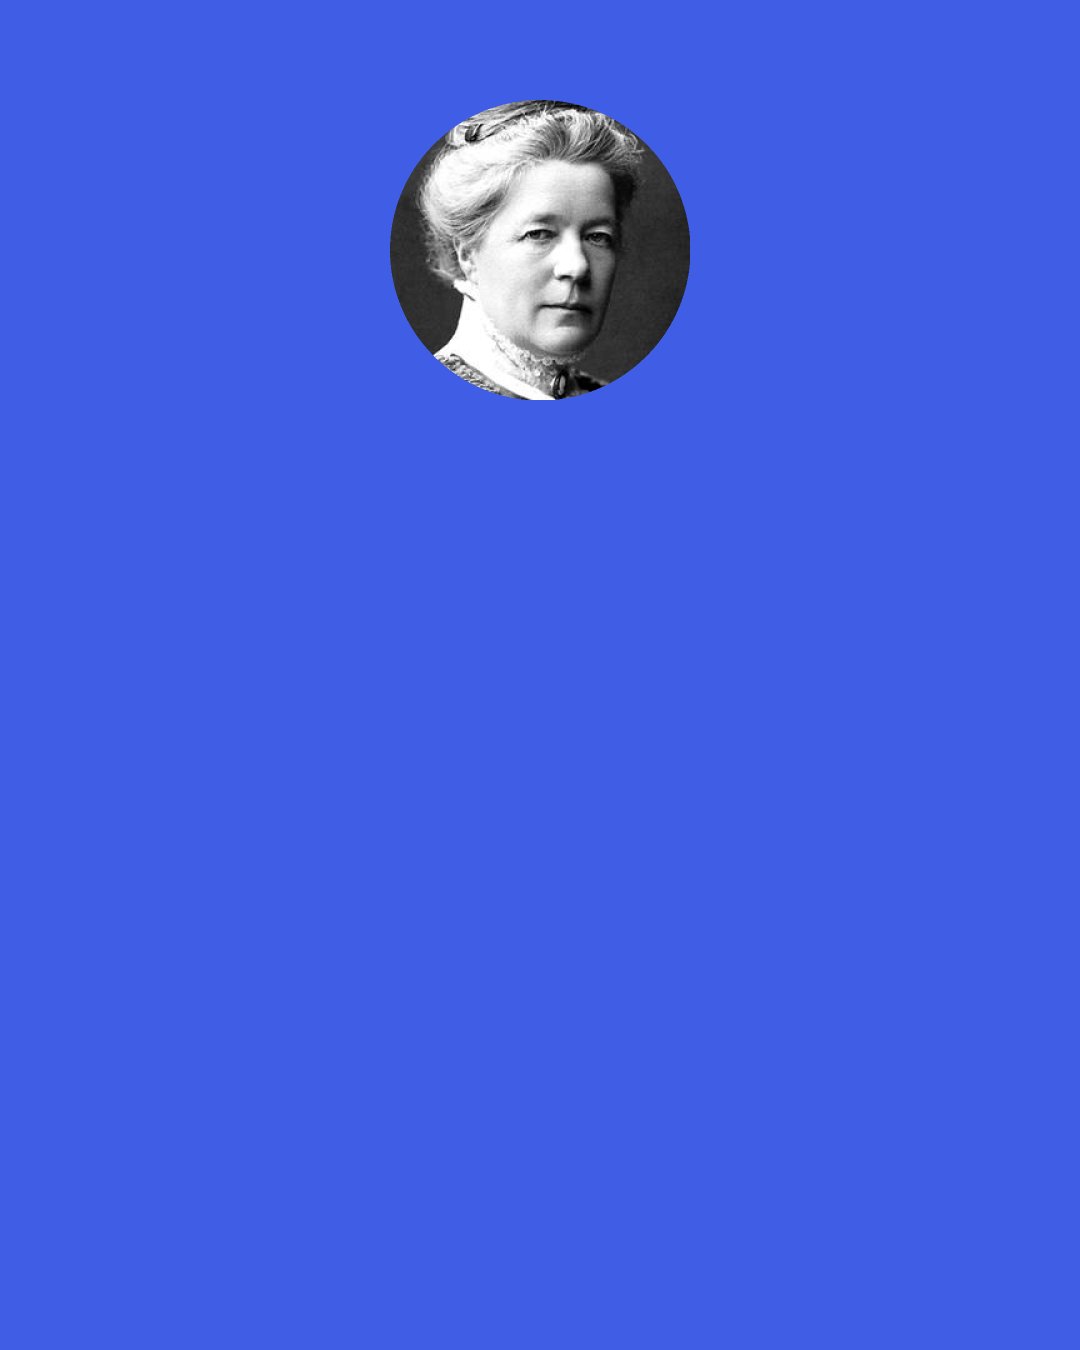 Selma Lagerlöf: For, so long as there are interesting books to read, it seems to me that neither I nor anyone else, for that matter, need be unhappy.